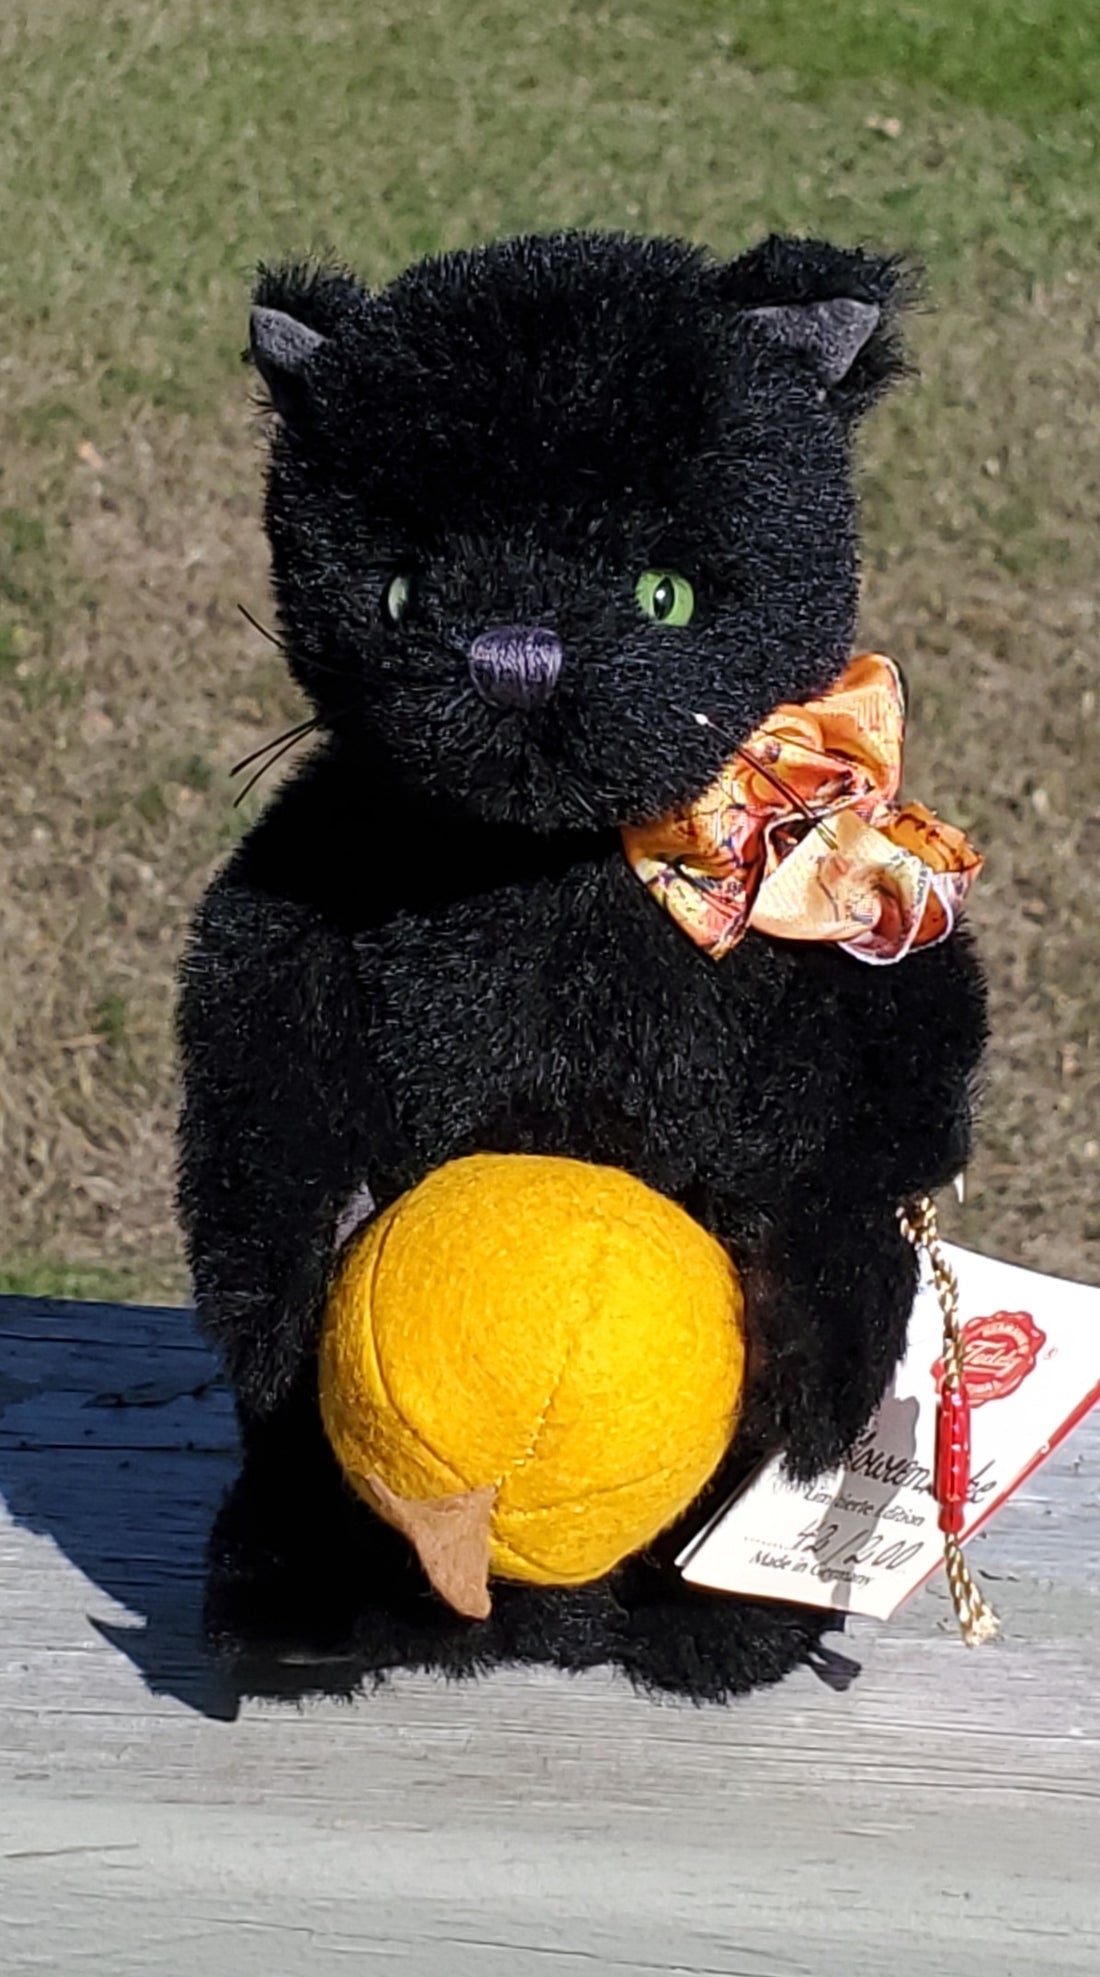 Halloween Cat - 7.5" Black, Mohair Cat by Teddy Hermann - Only 200 made!